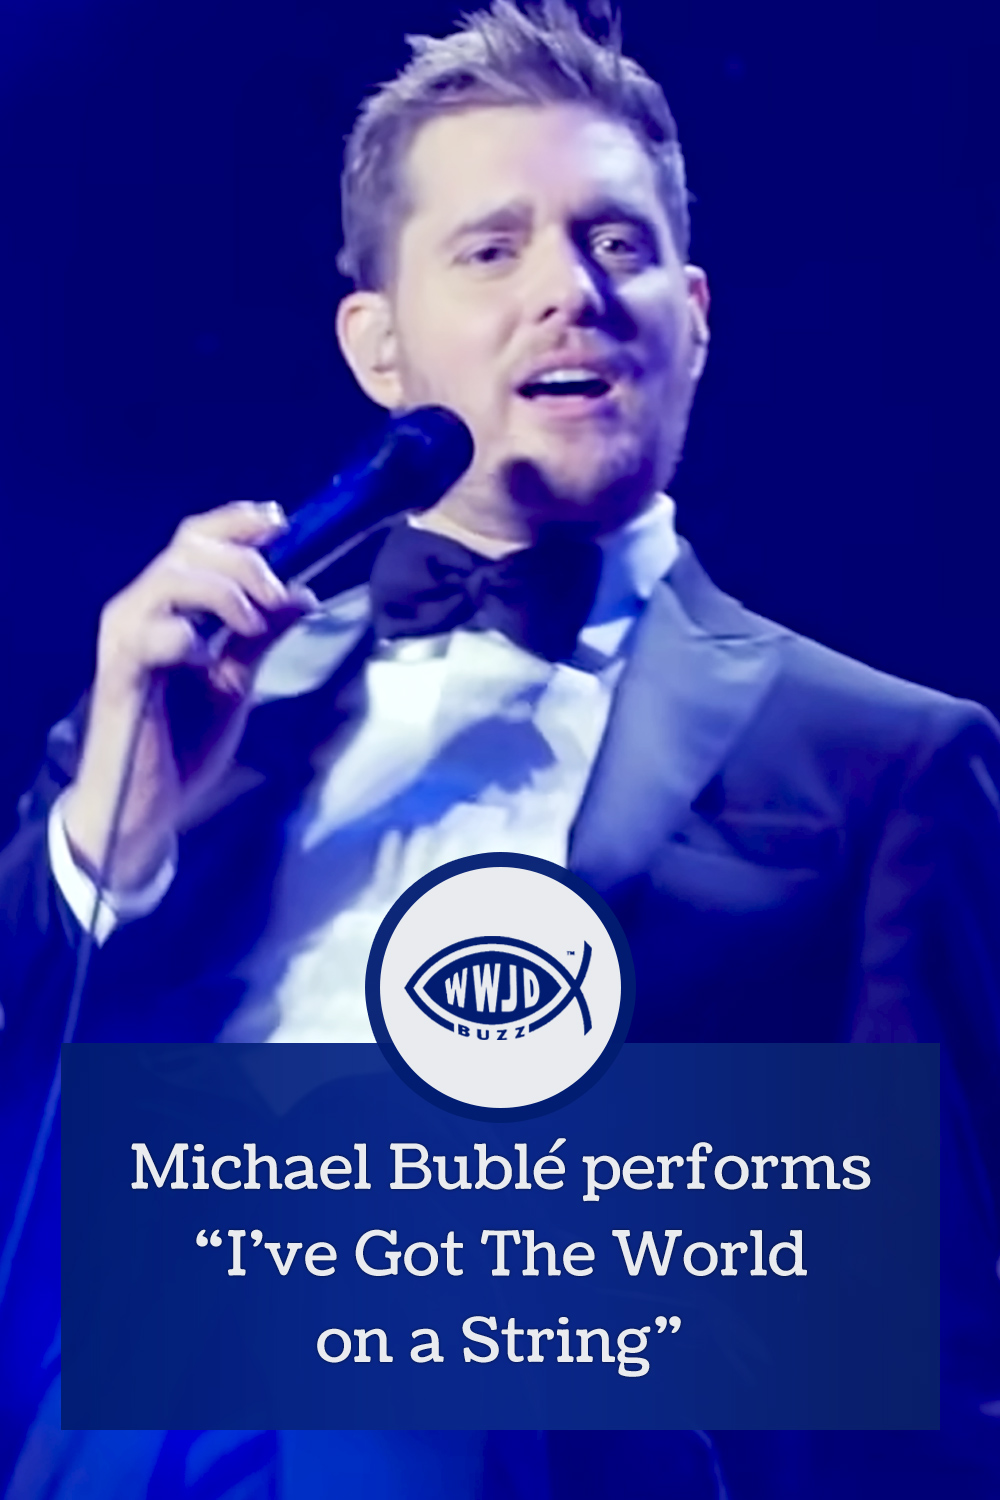 Michael Bublé performs “I’ve Got The World on a String”